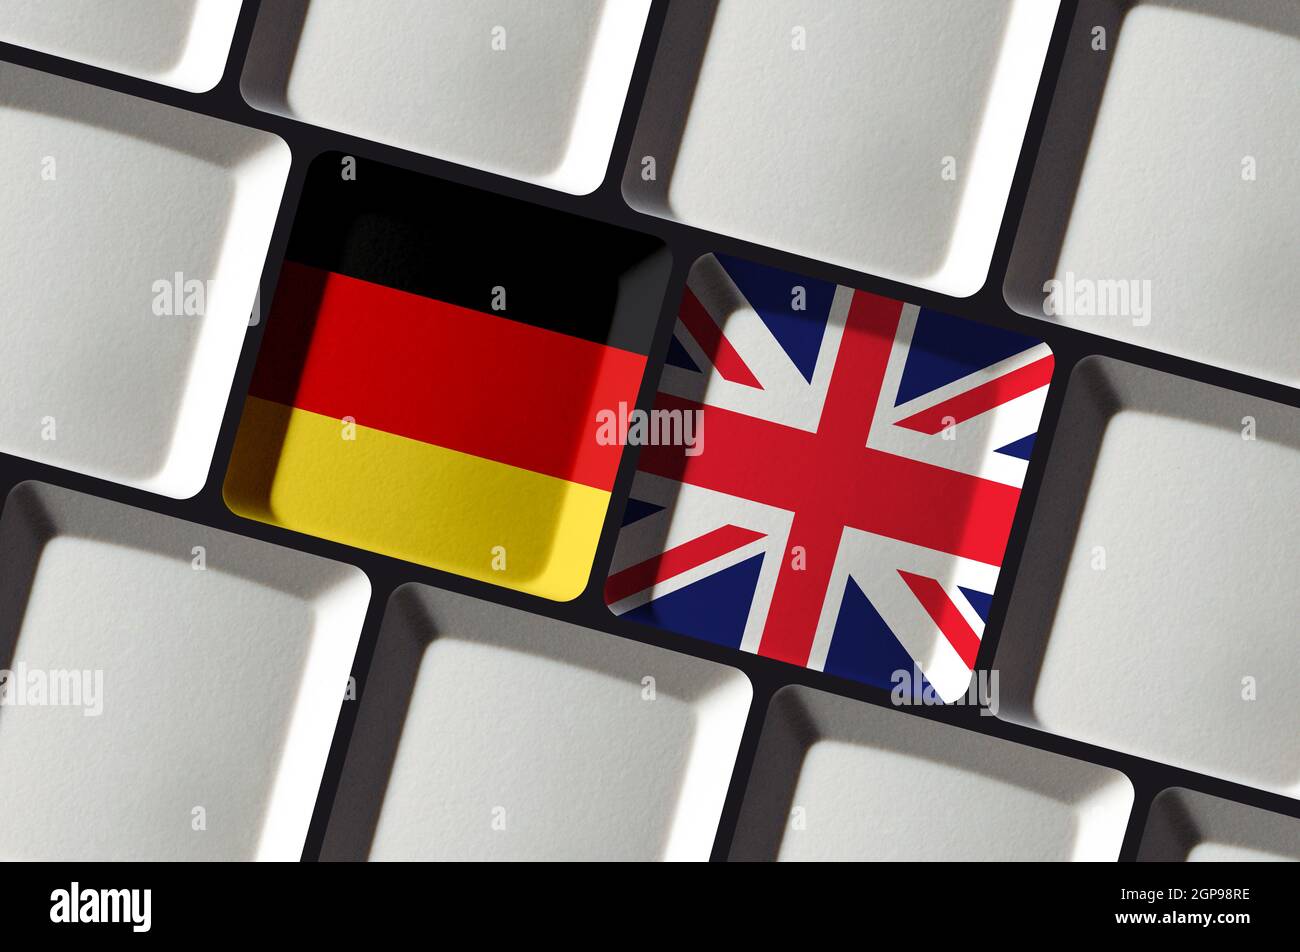 Translate into English or German - translation school or online dictionary Stock Photo